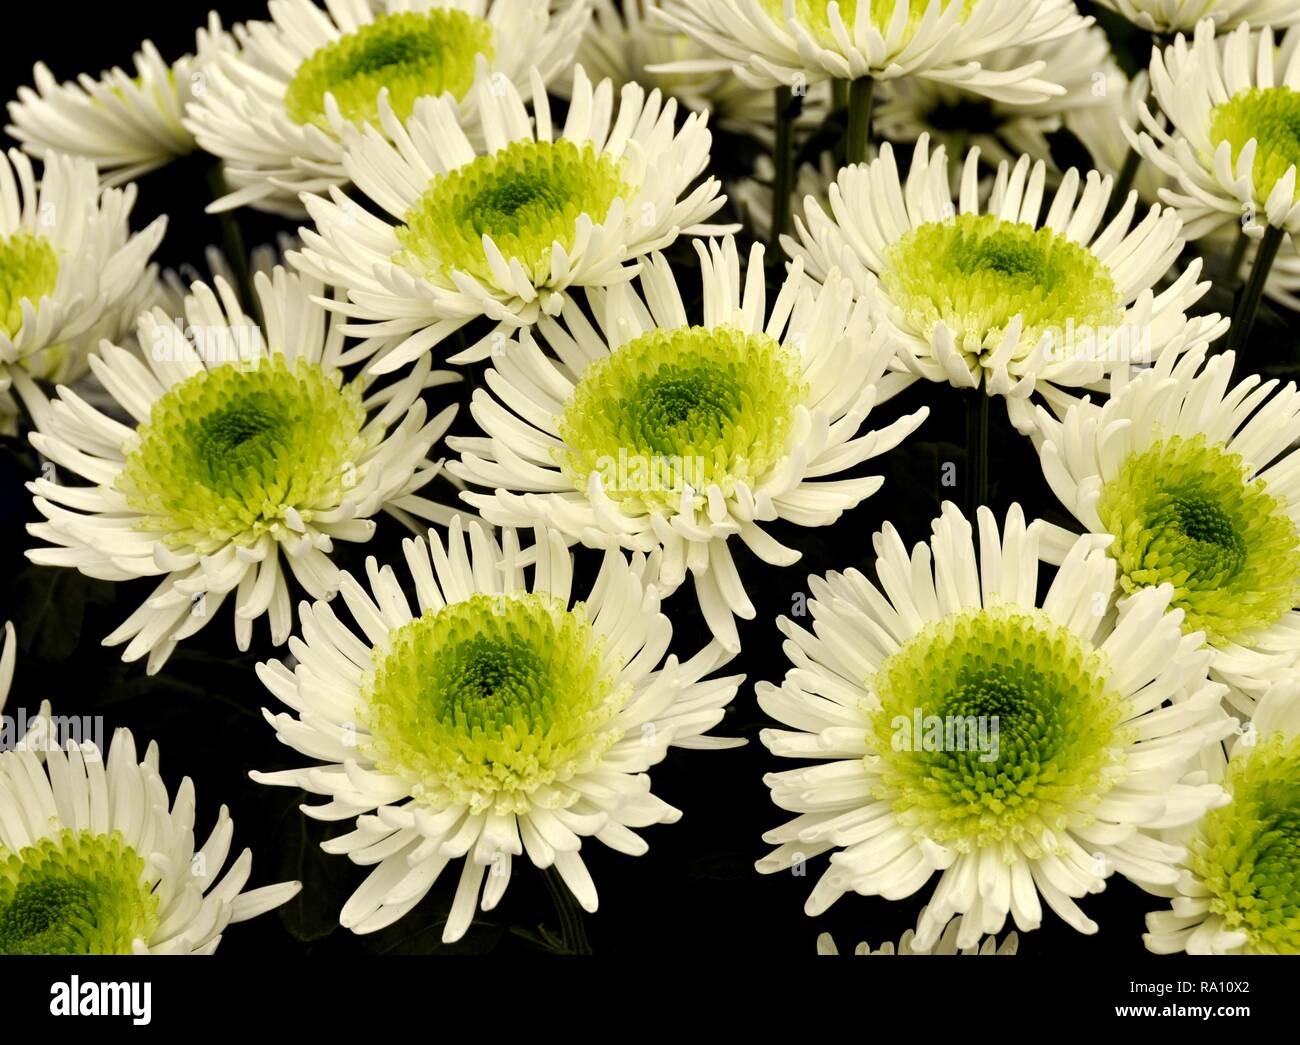 White and green Chrysanthemum flowers on black background Stock Photo